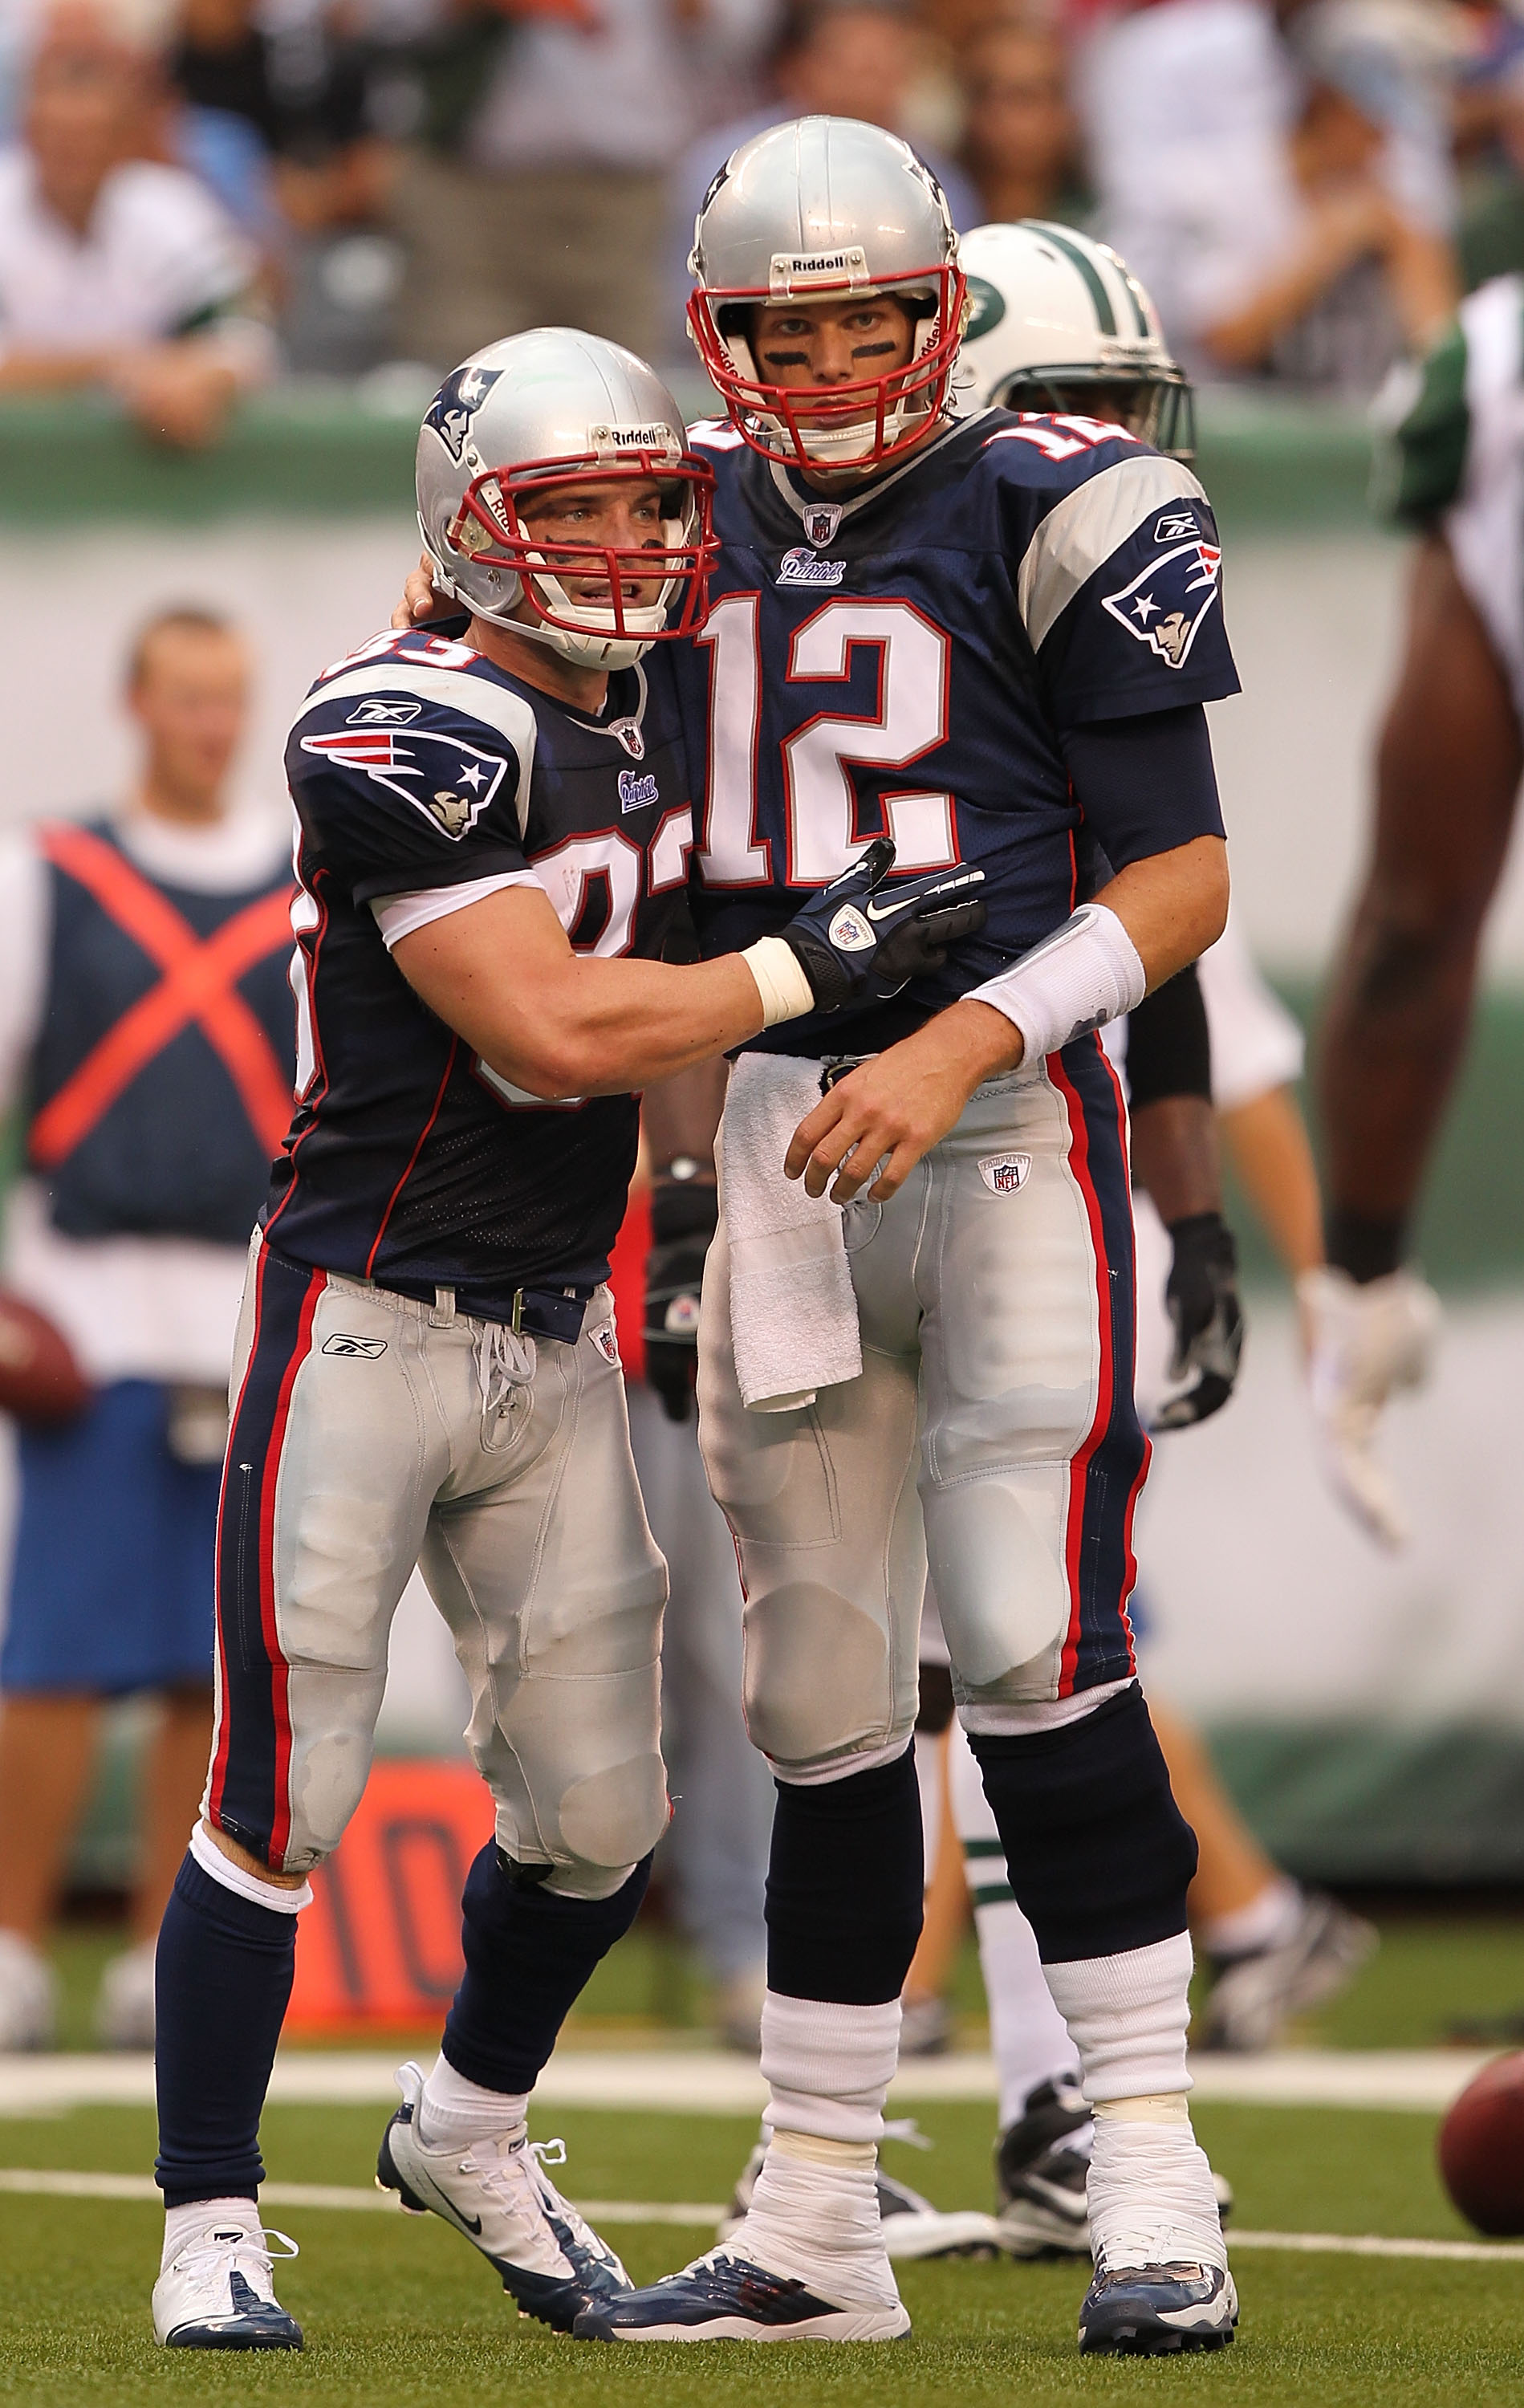 EAST RUTHERFORD, NJ - SEPTEMBER 19:  Wes Welker #83  celebrates with Tom Brady #12 of the New England Patriots against  the New York Jets during their  game on September 19, 2010 at the New Meadowlands Stadium  in East Rutherford, New Jersey.  (Photo by A